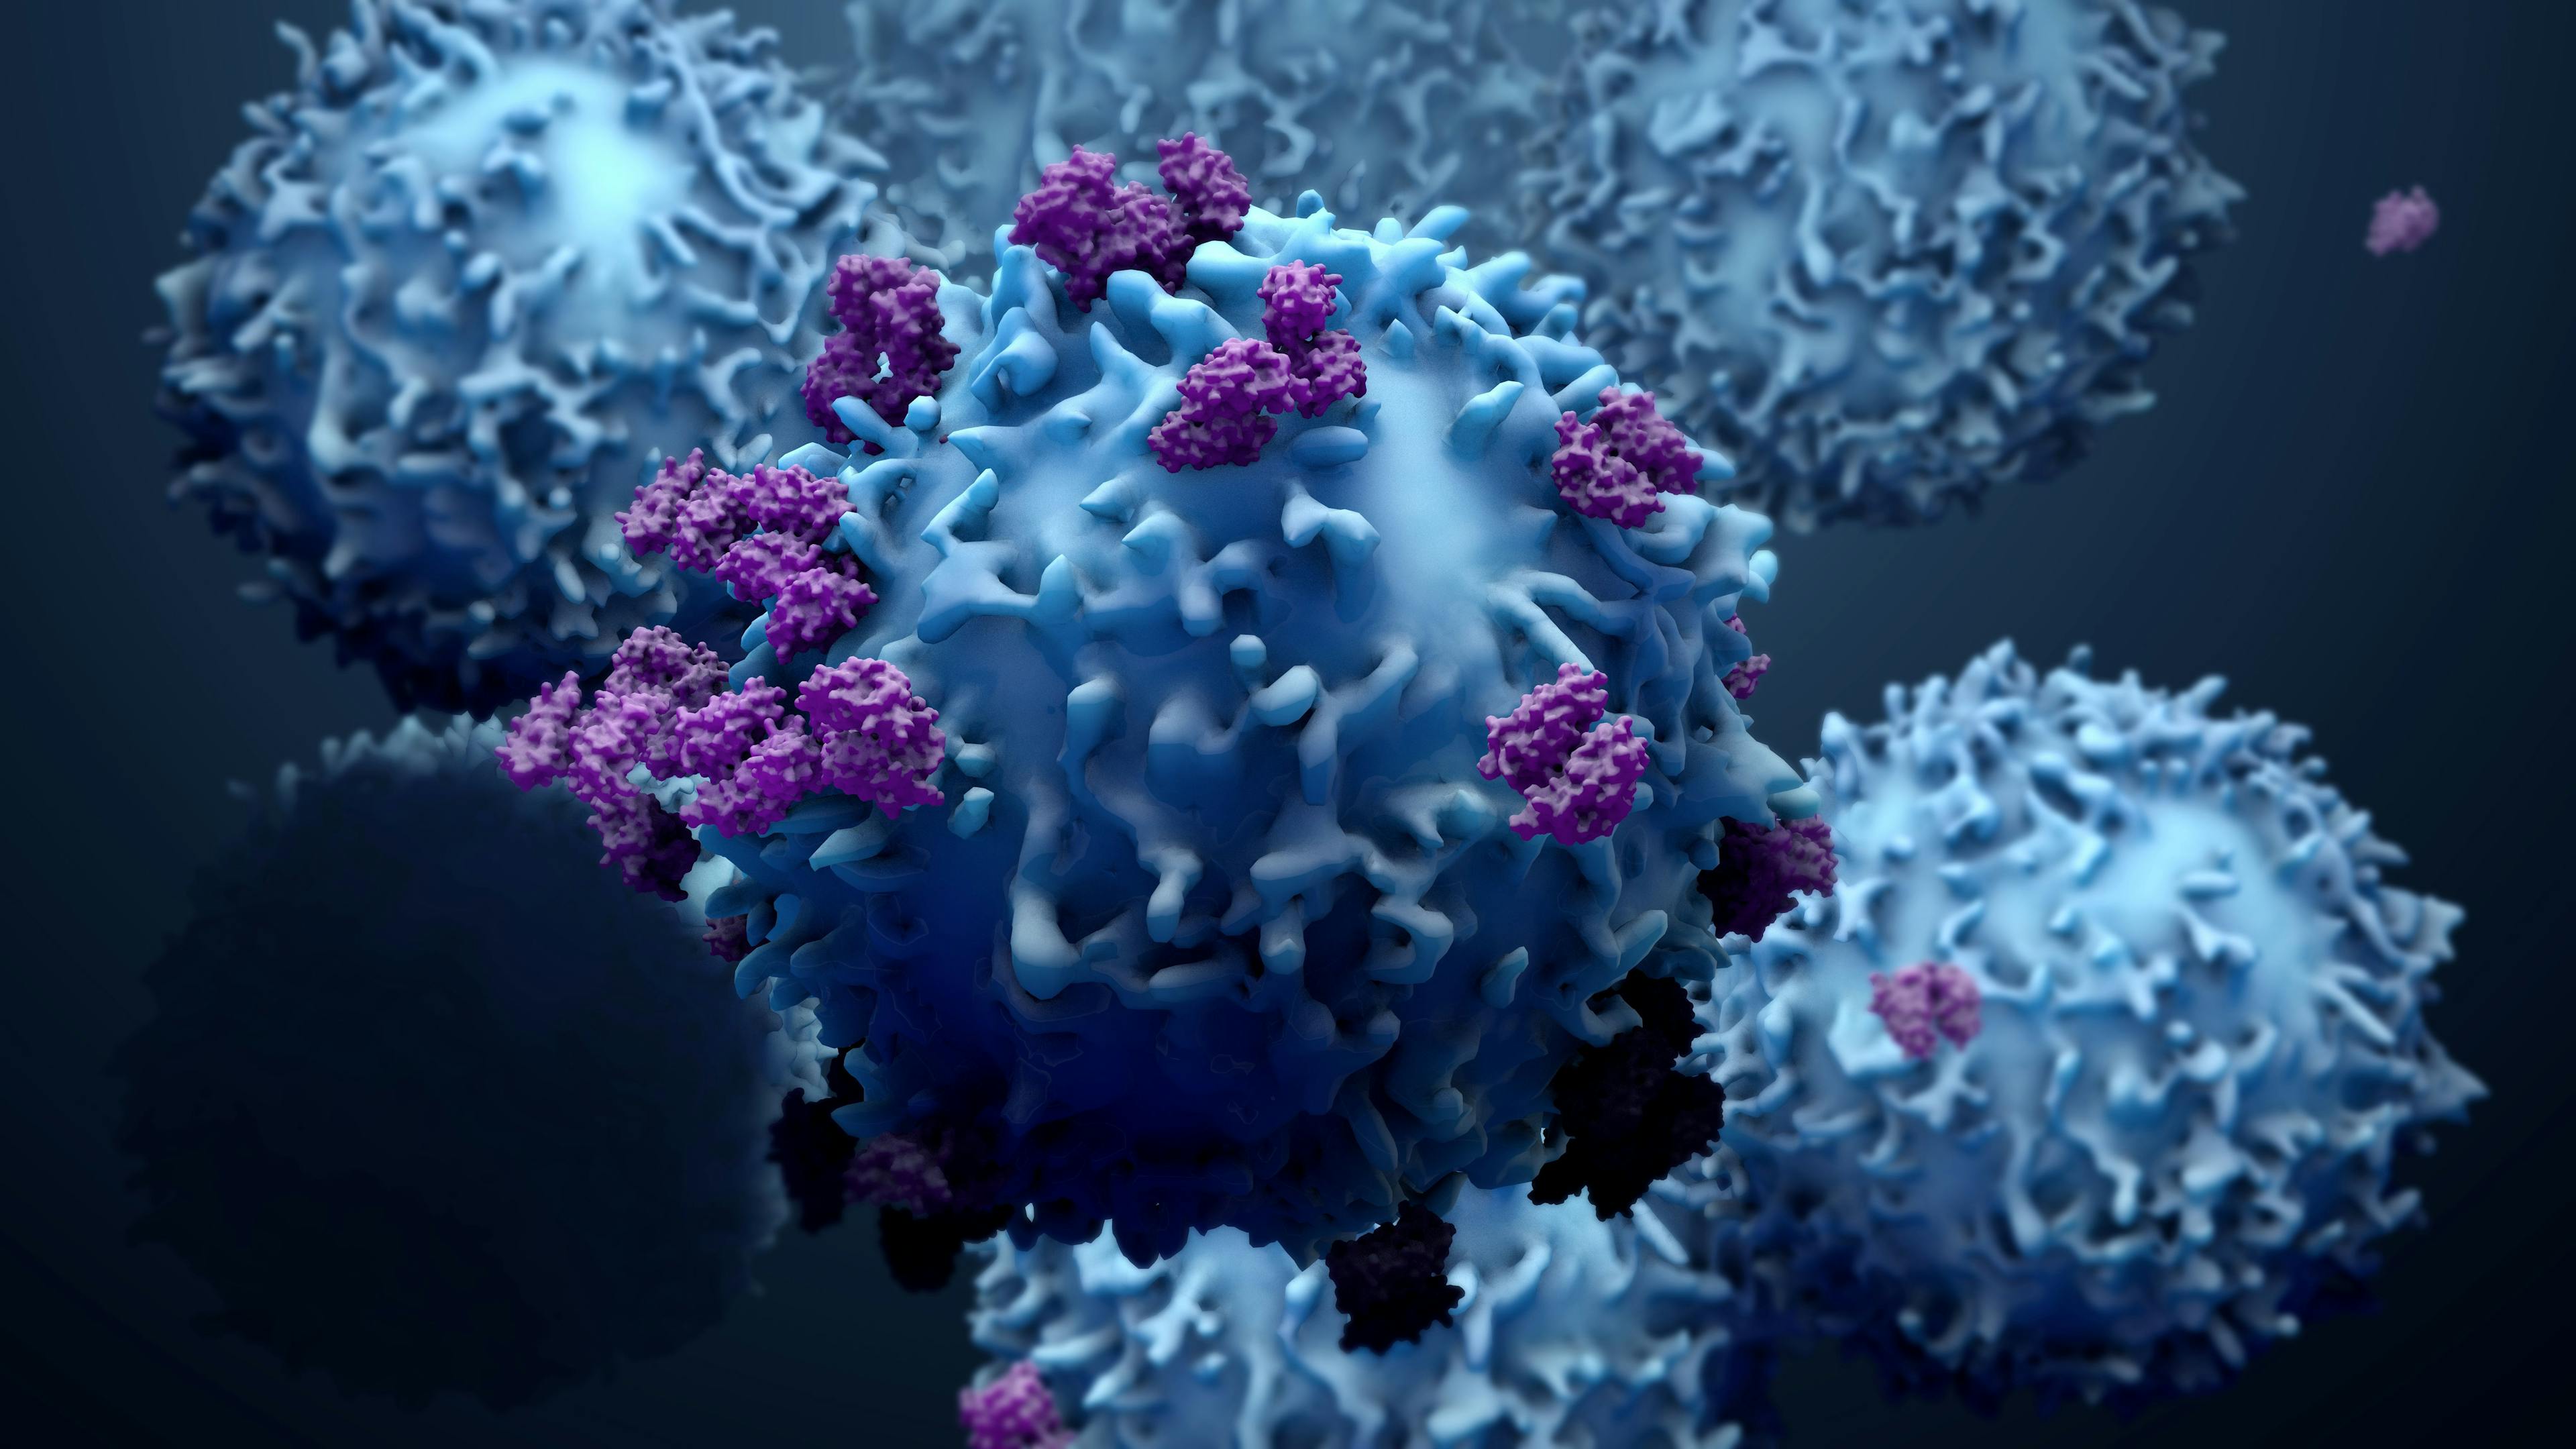 d illustration proteins with lymphocytes , t cells or cancer cells | Image Credit: © Design Cell - www.stock.adobe.com